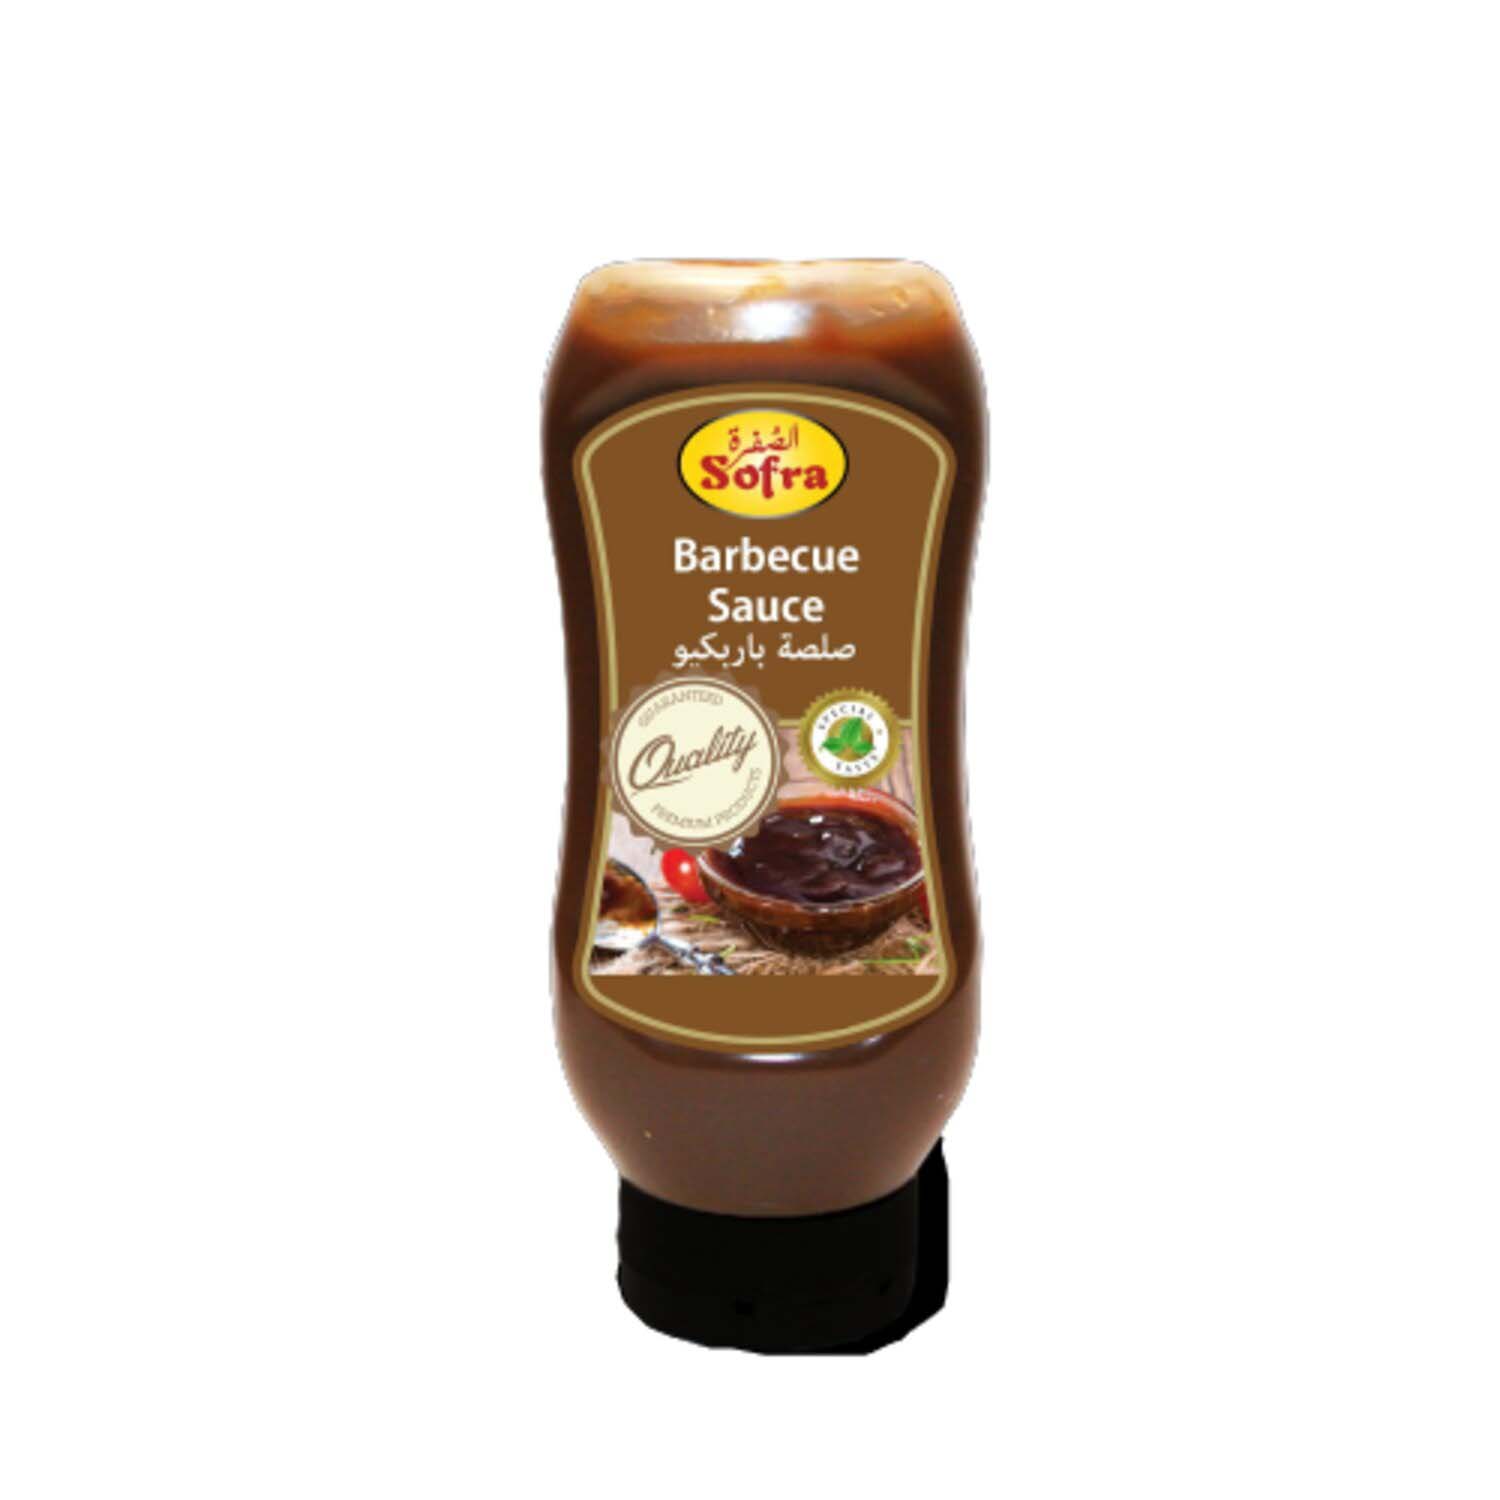 Offer Sofra Barbecue Sauce 500g X 2pcs